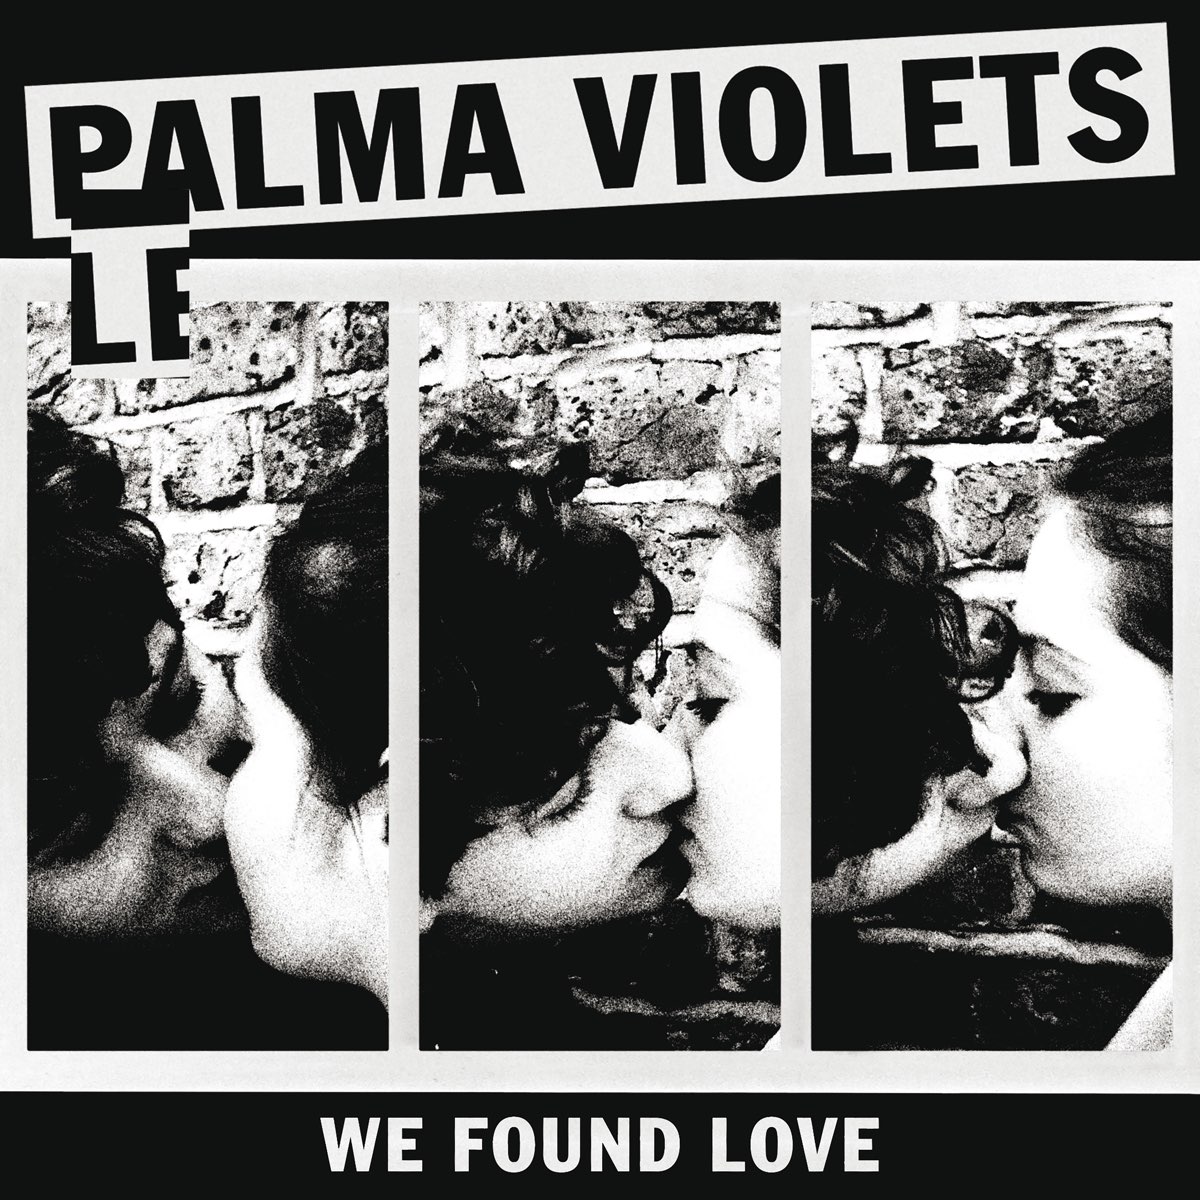 We found love текст. Palma Violets. We found Love обложка. Found Love.